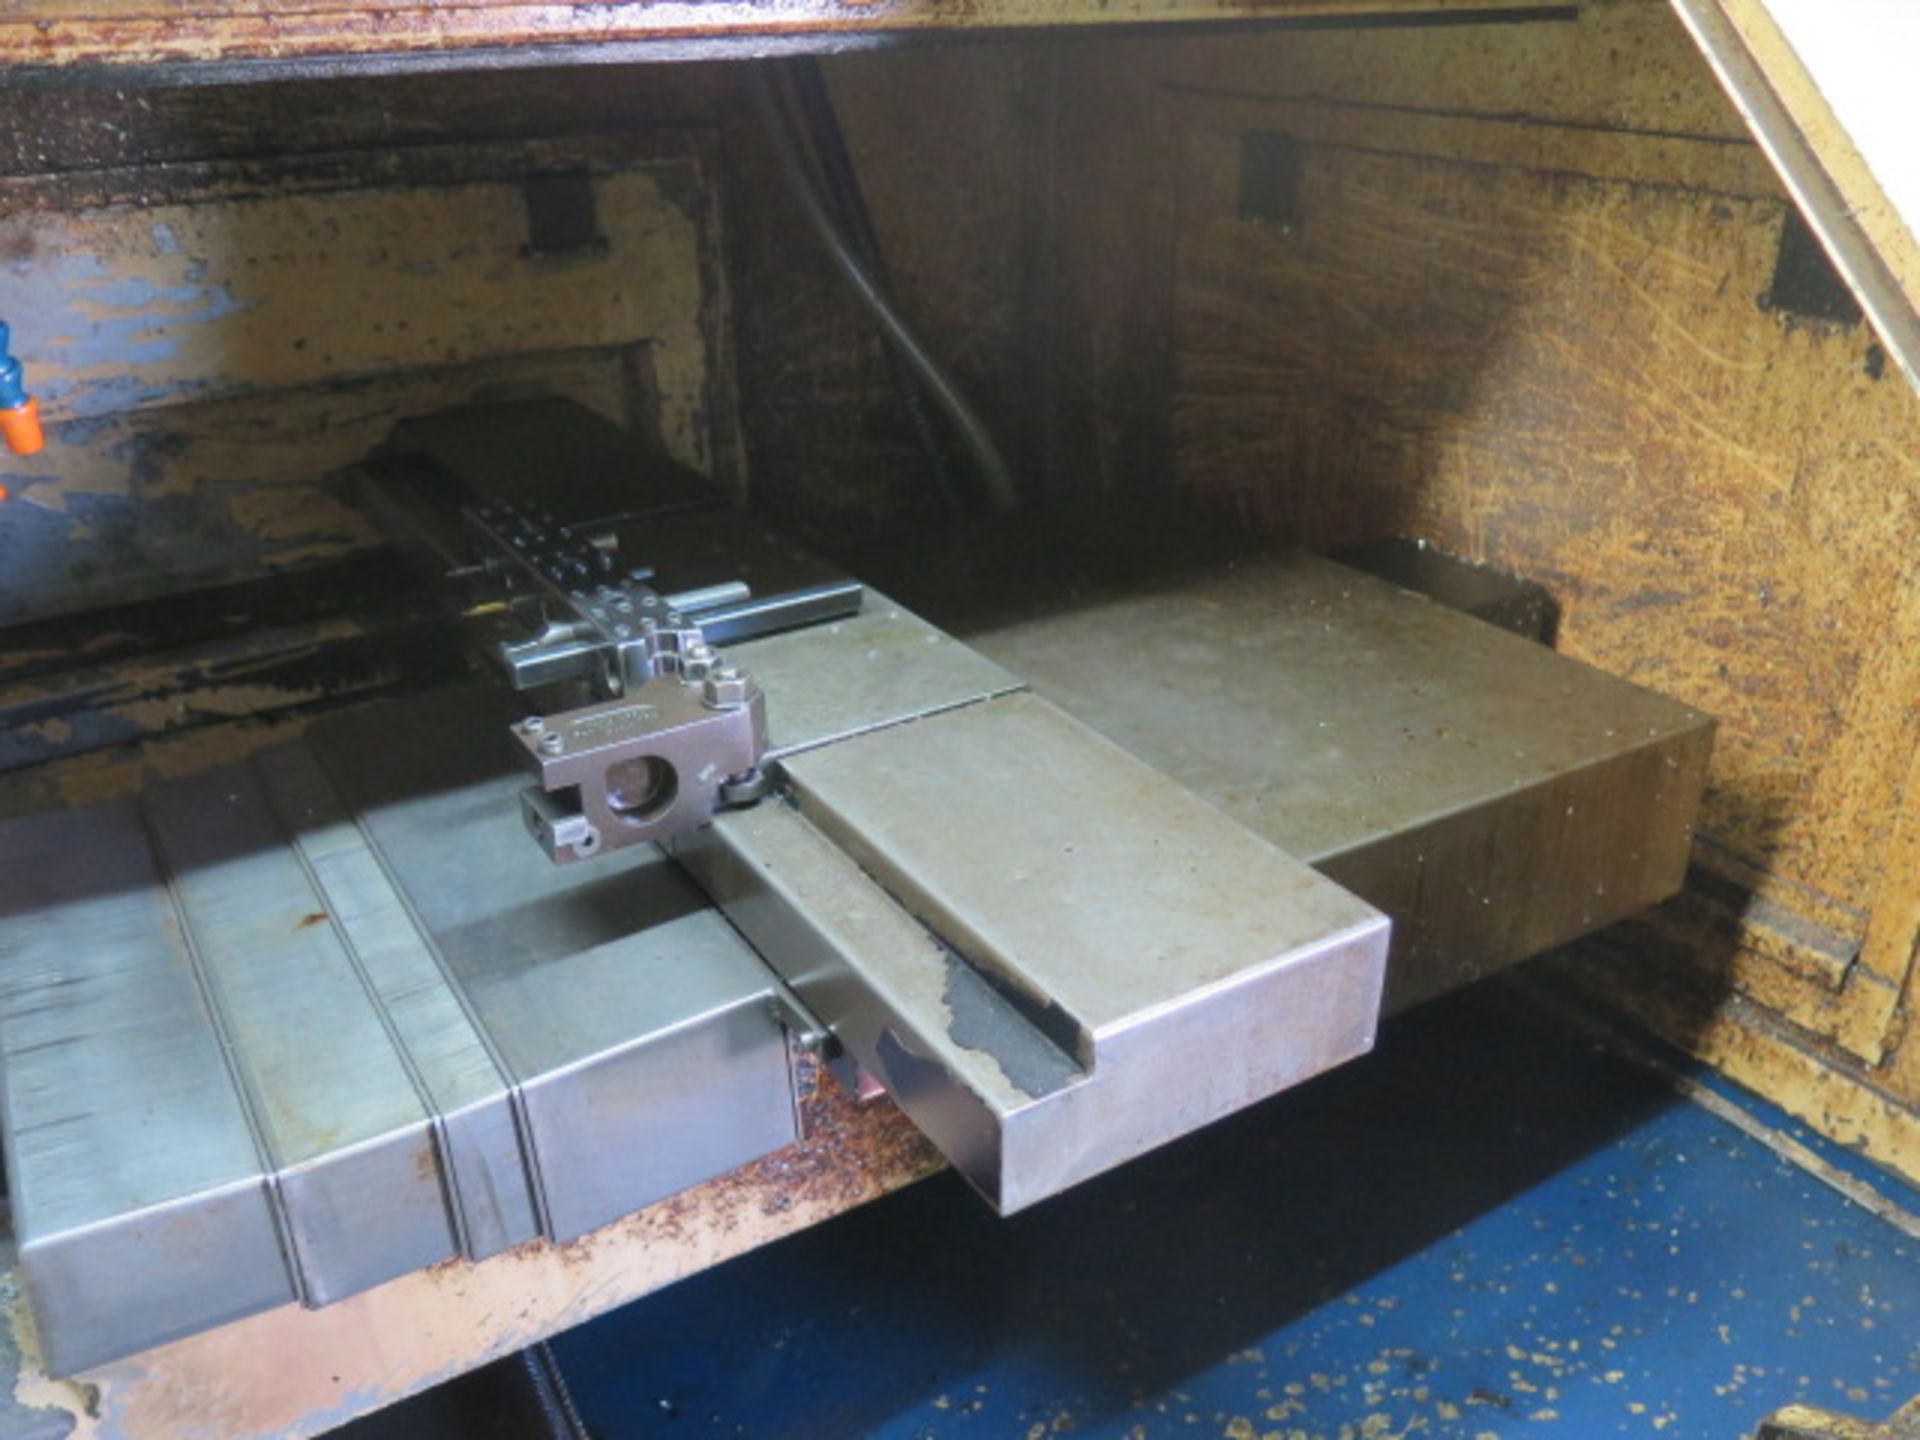 1995 American Way AW-100 CNC Cross Slide Lathe s/n 600L-109043 w/ American Way Controls, 5C Spindle, - Image 9 of 11